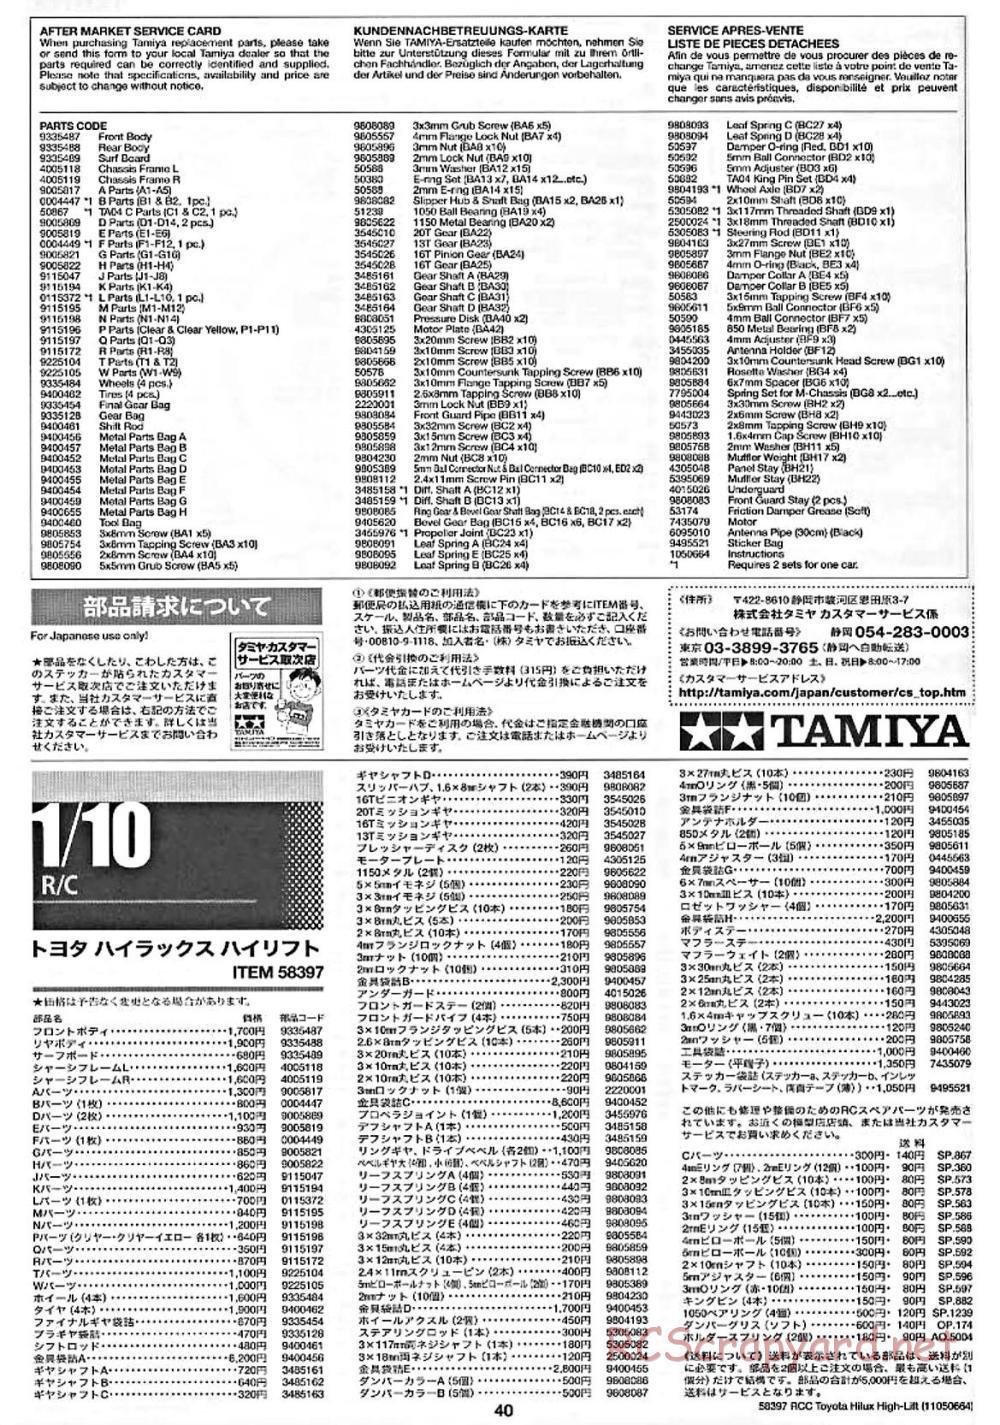 Tamiya - Toyota Hilux High-Lift Chassis - Manual - Page 35